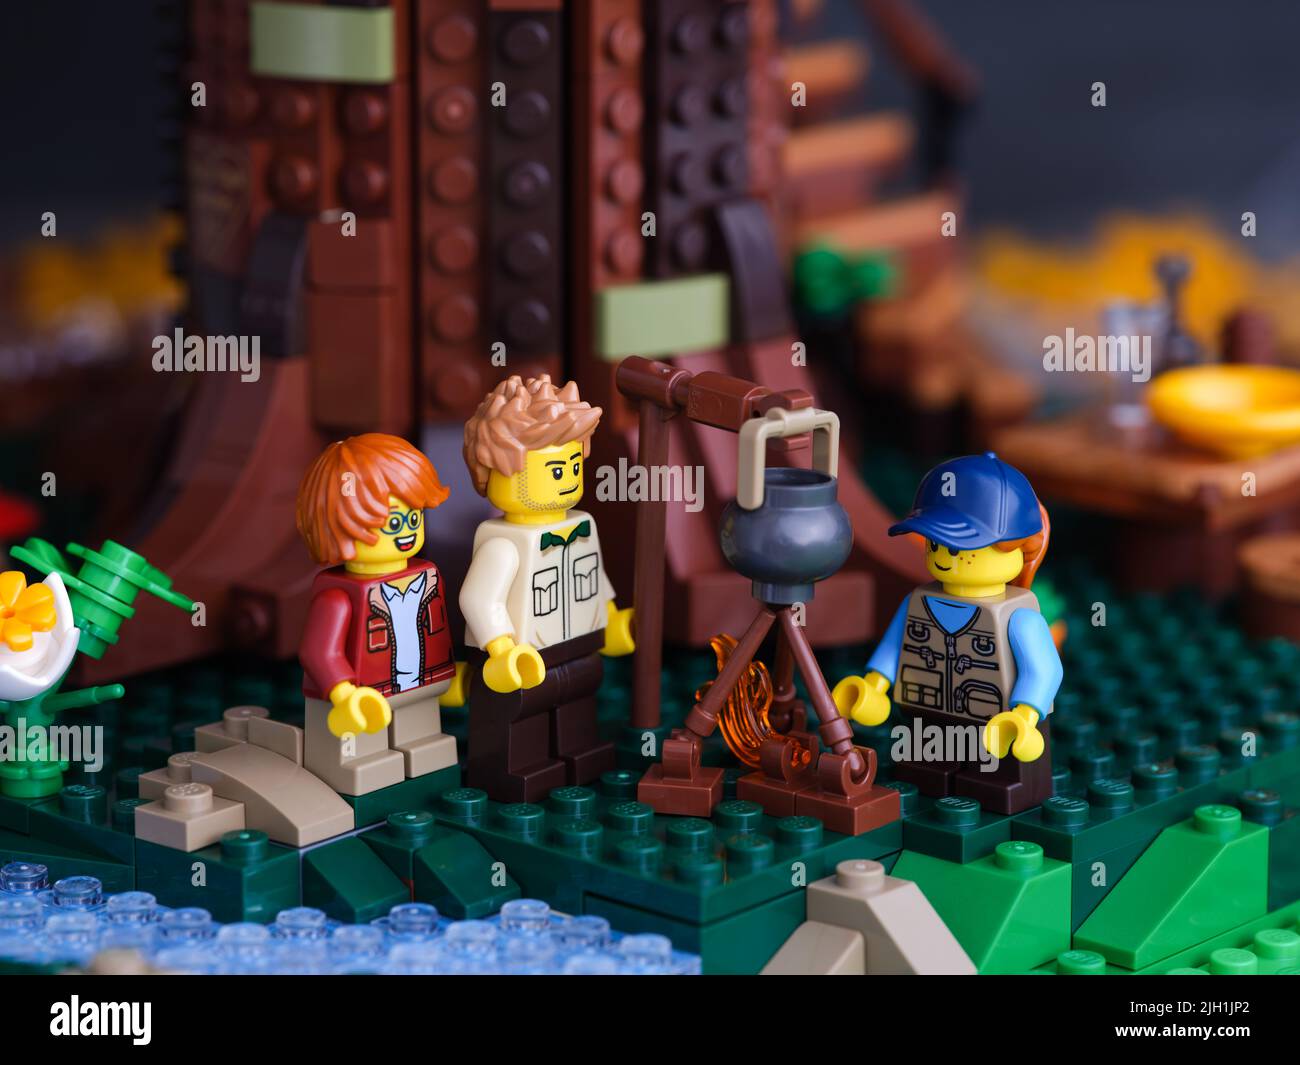 Tambov, Russian Federation - June 22, 2022  Three Lego minifigures - father and two children, standing under a tree and cooking food on a campfire. Stock Photo